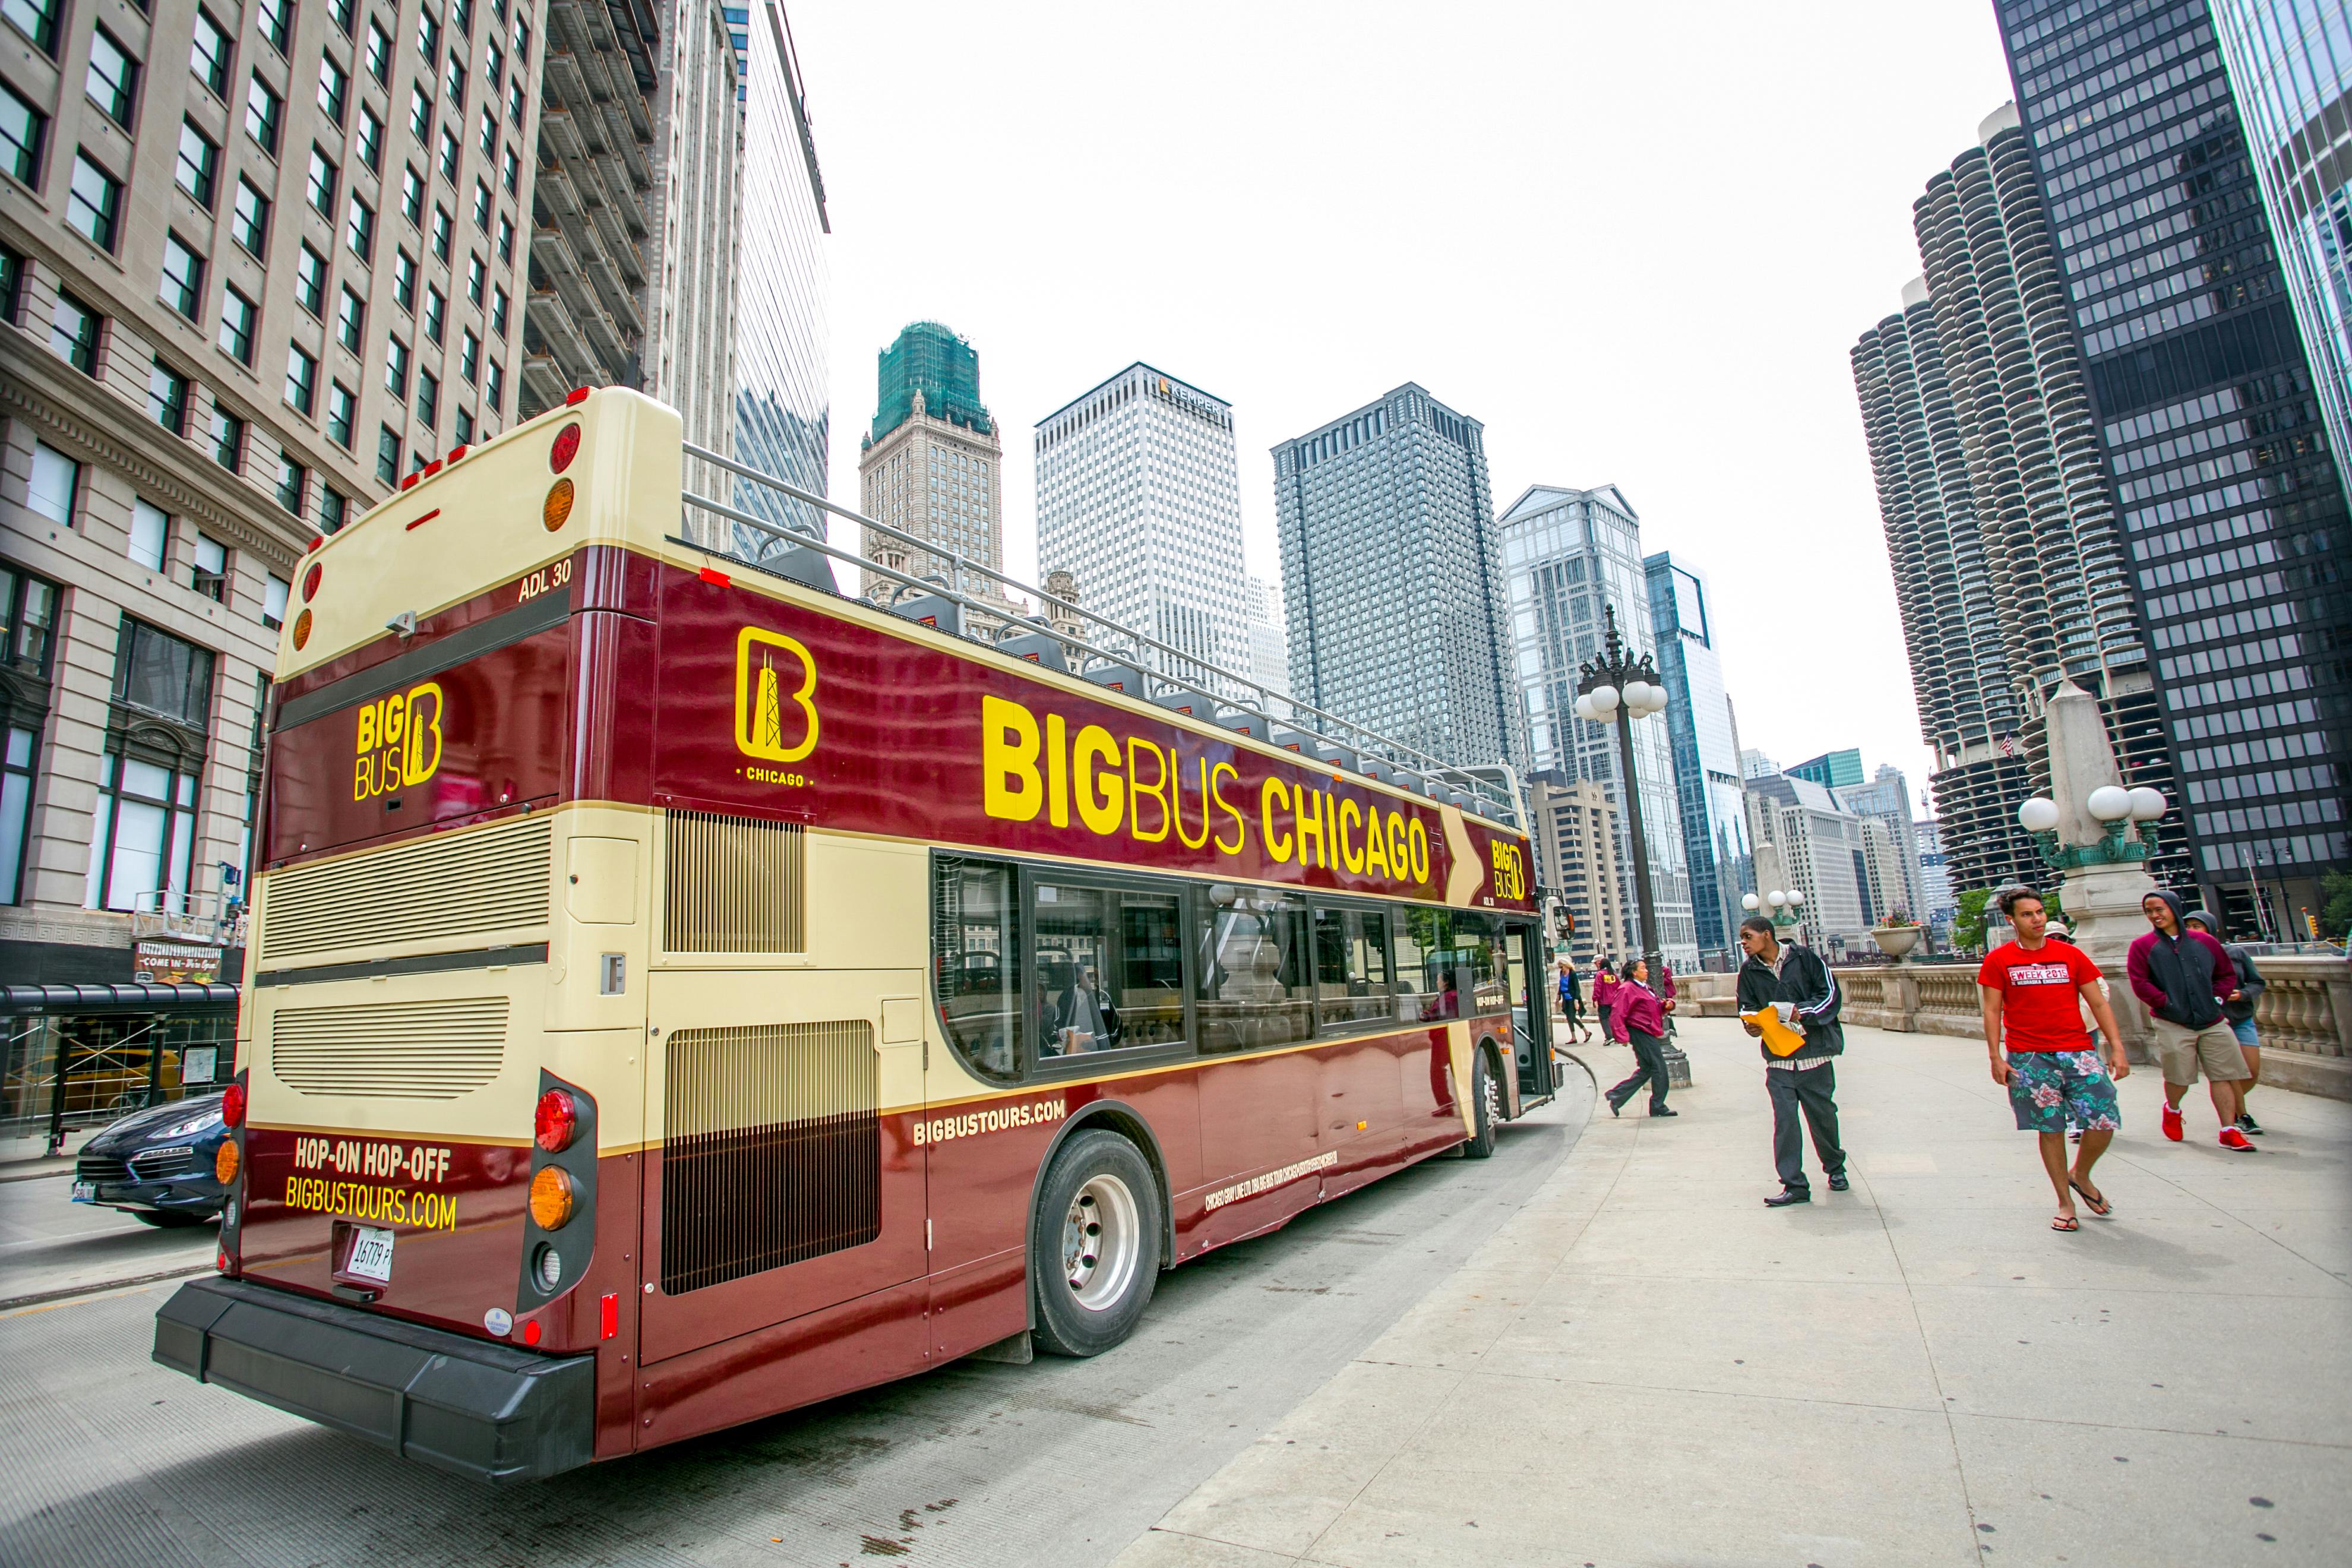 48h Big Bus hop-on hop-off tour of Chicago with Sunset Live tour Musement